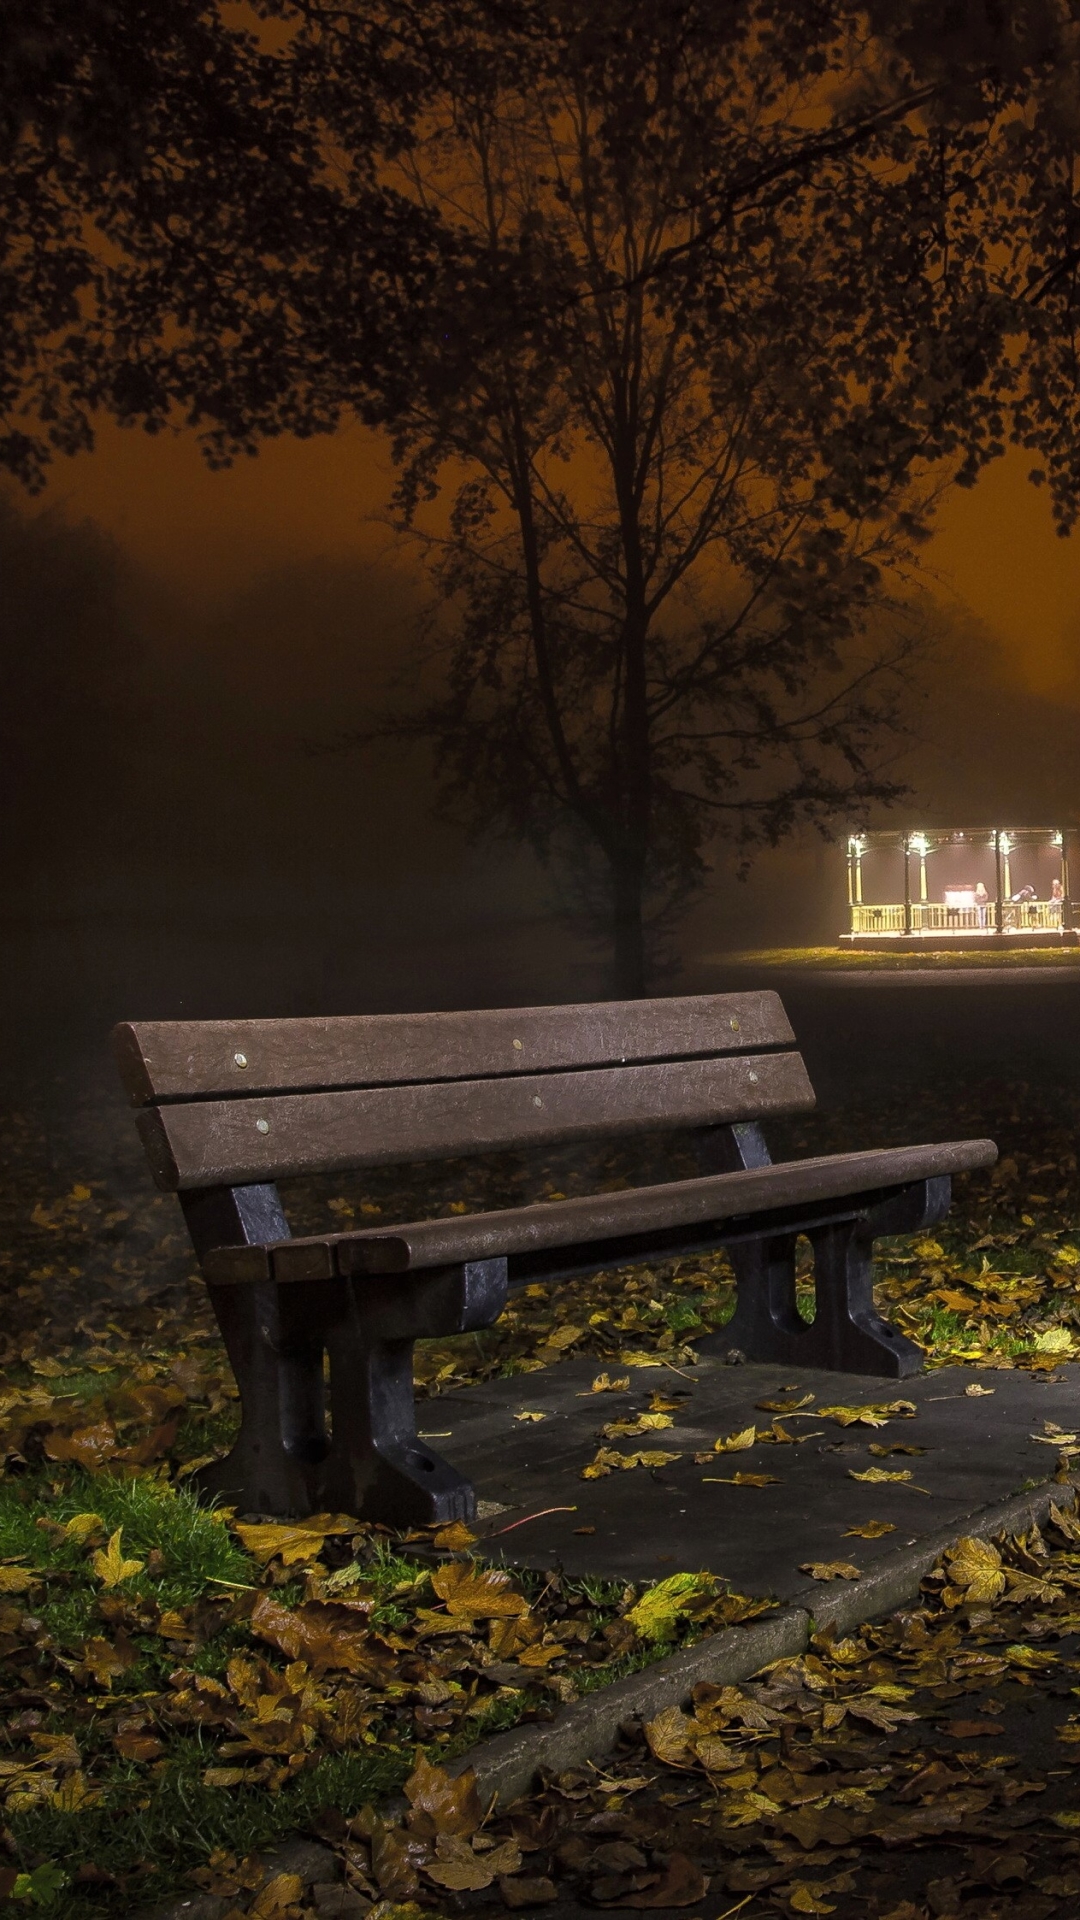 Bench in Autumn Park at Night